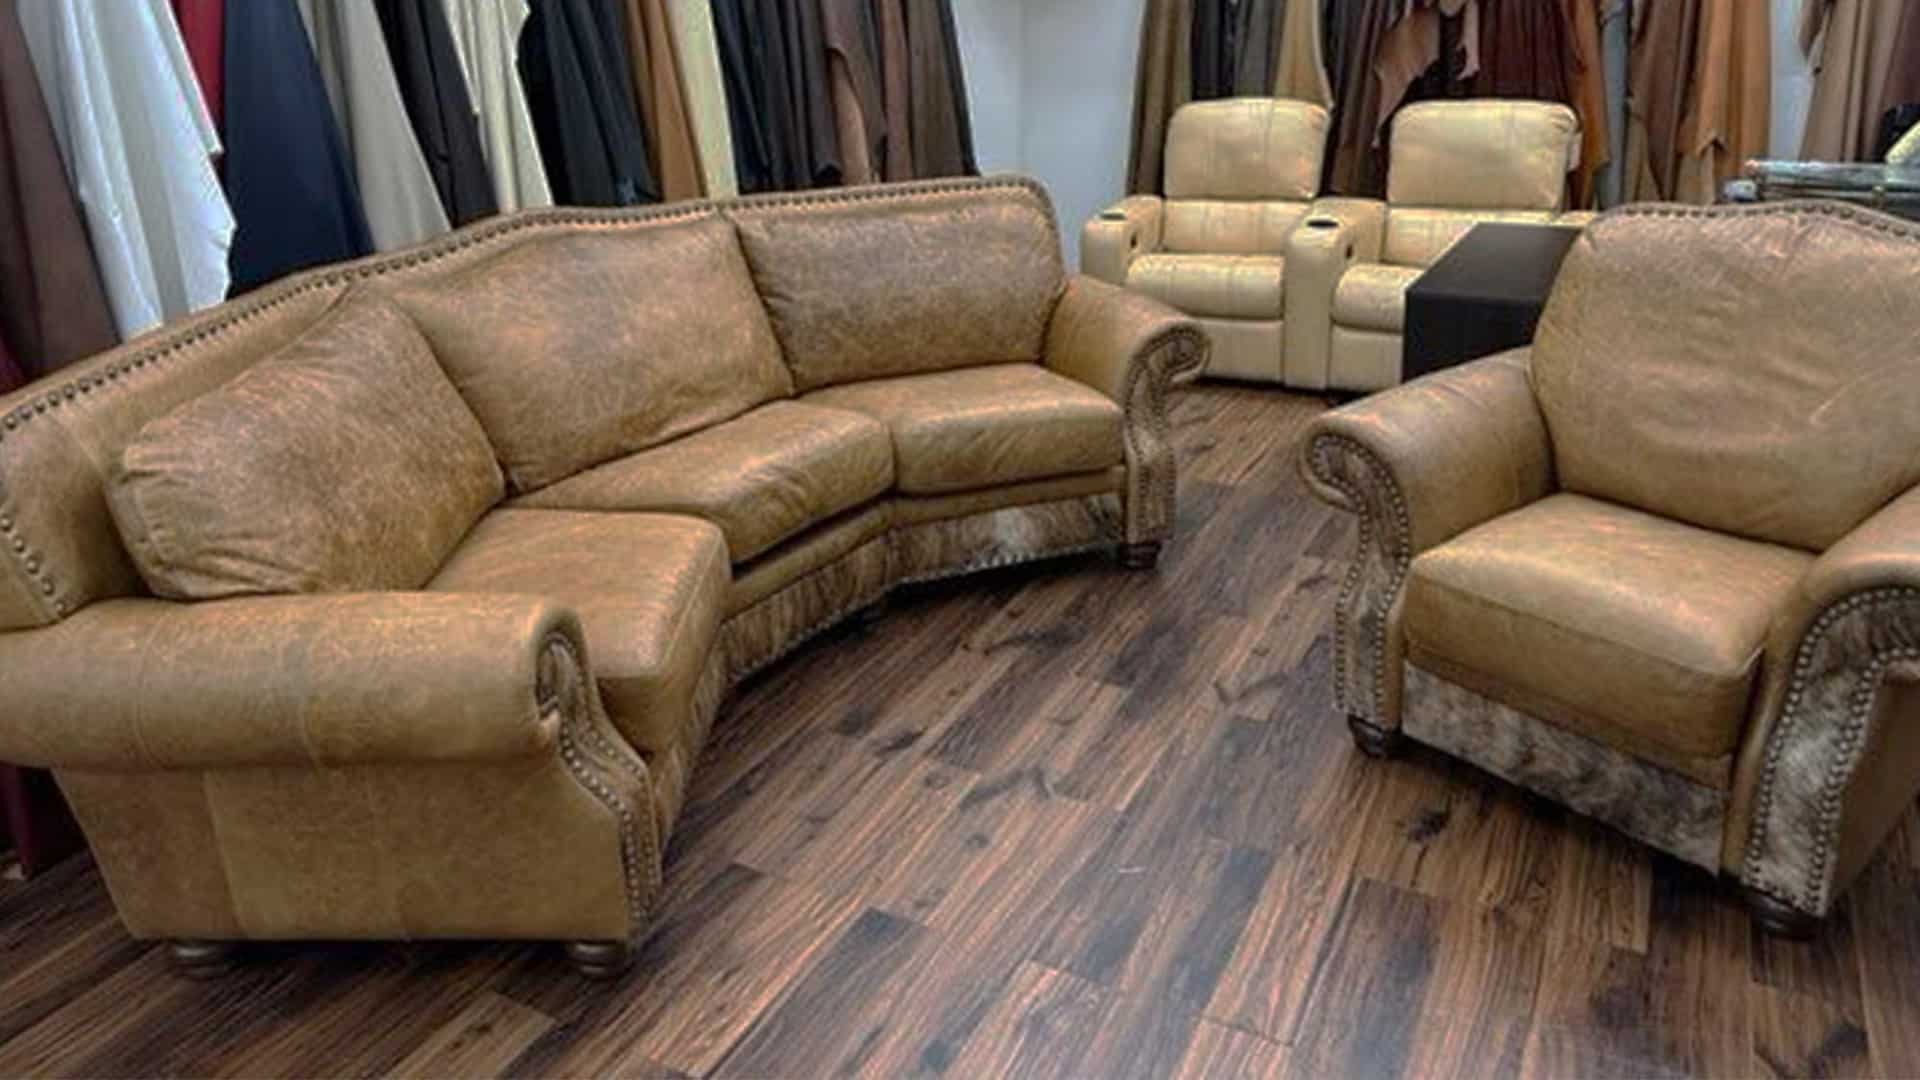 What Is the Average Price of a Farmhouse Leather Sectional?